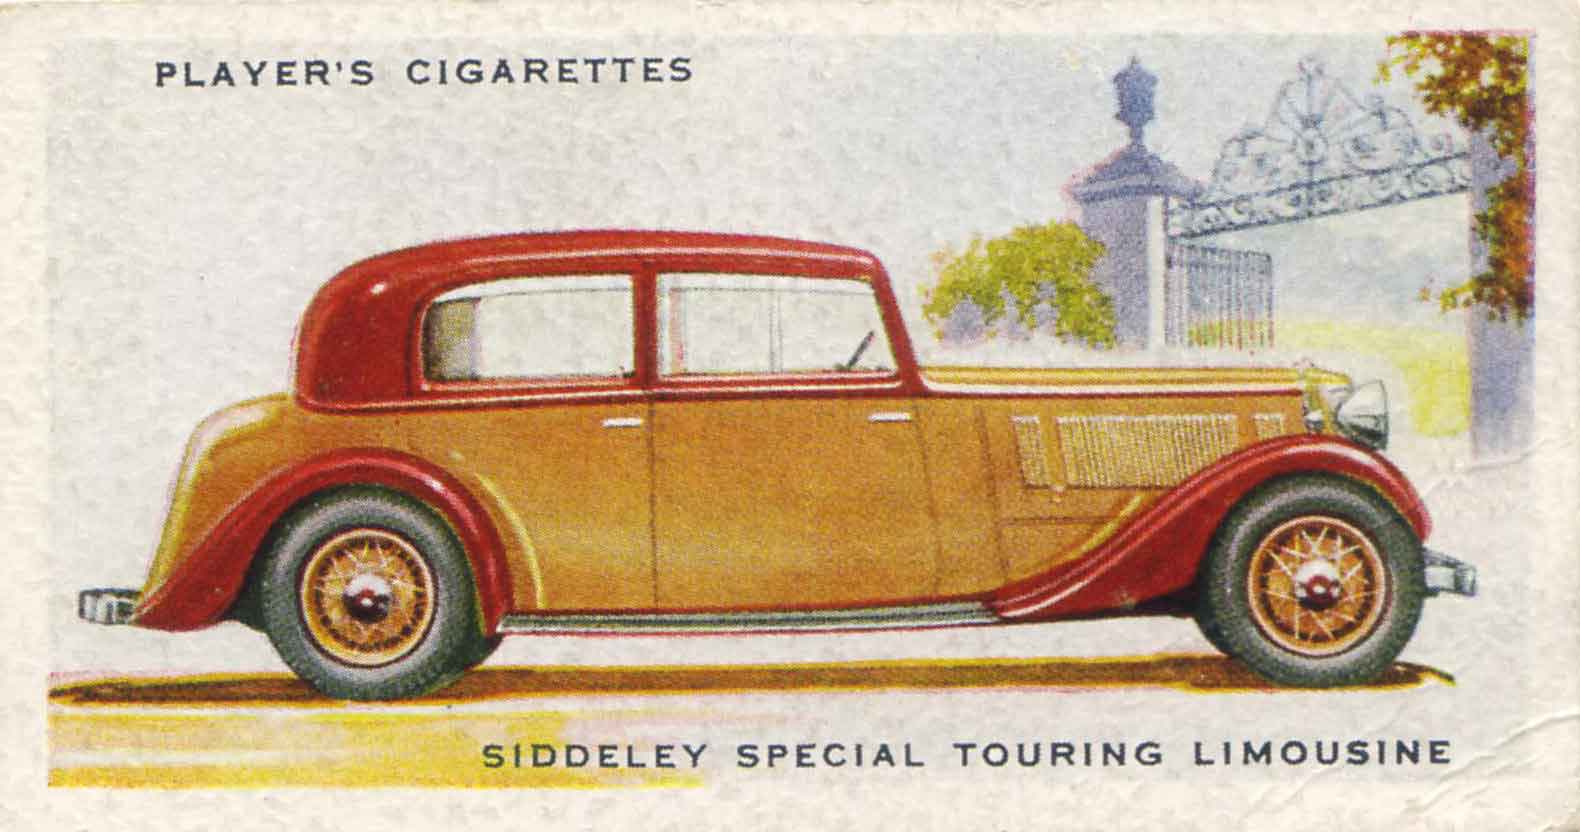 Siddeley Special Touring Limousine. 1937 cigarette card.